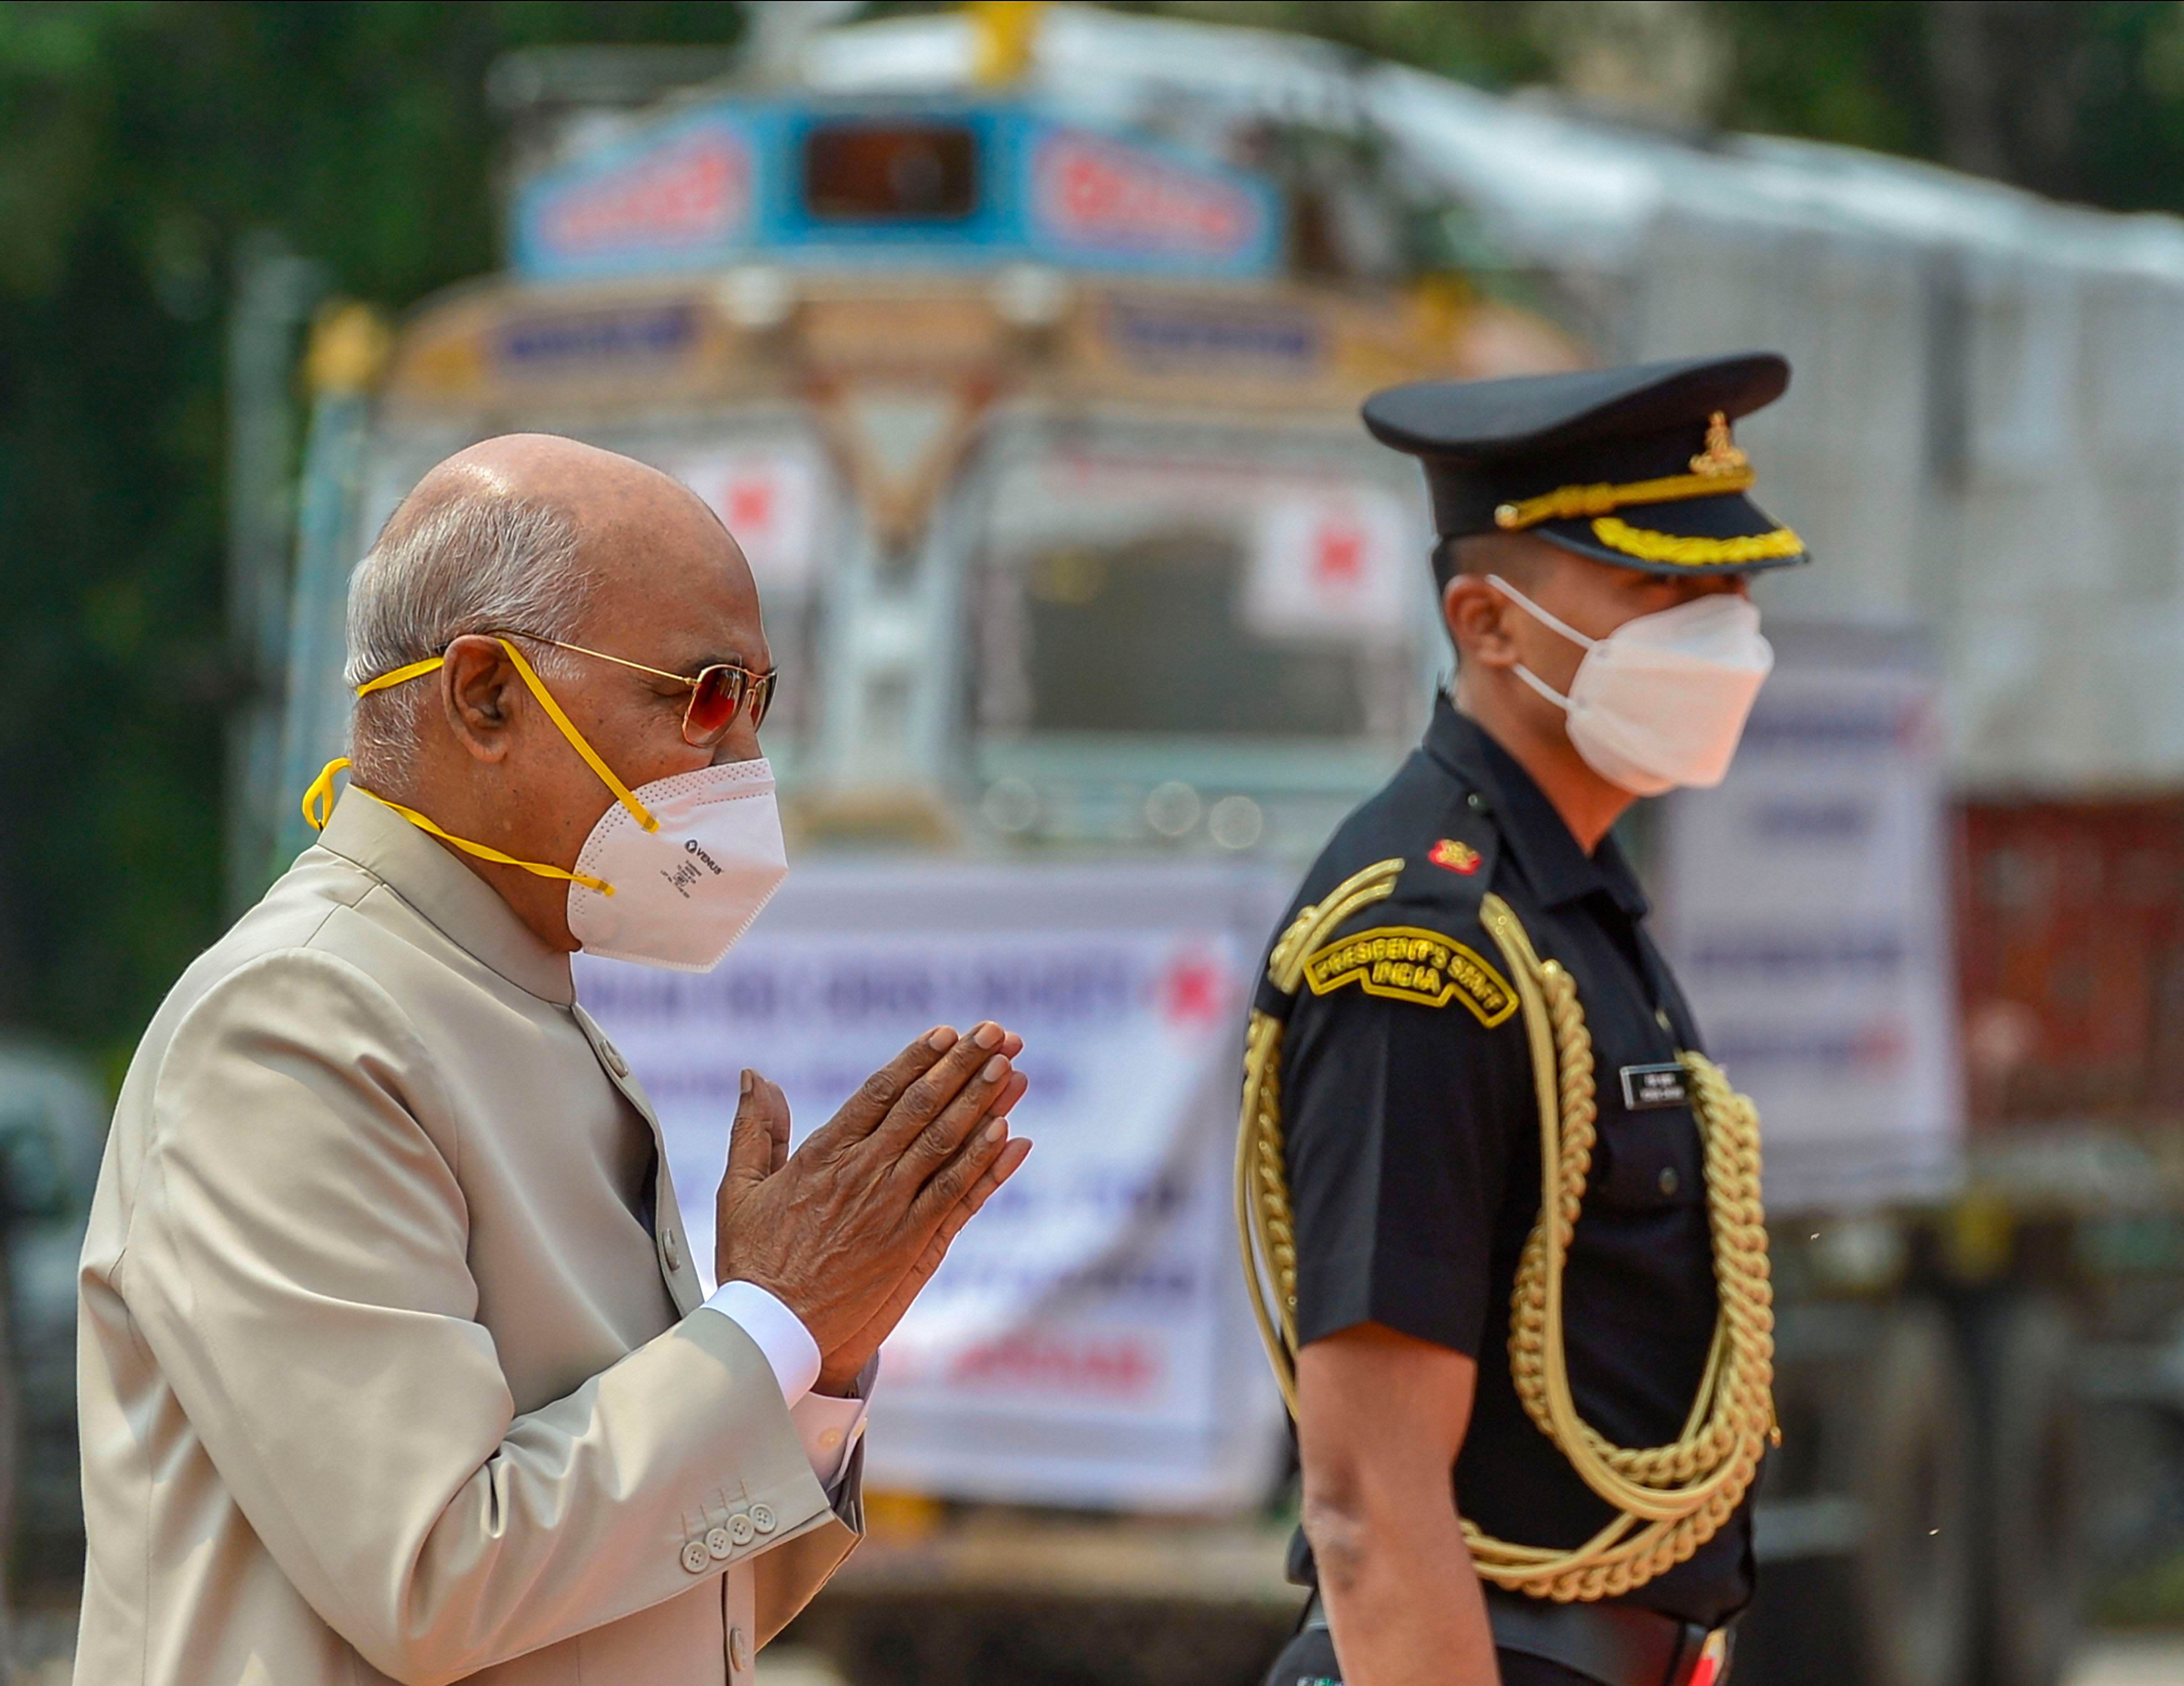 President Ram Nath Kovind arrives to flag off trucks loaded with relief materials for UP, Bihar and Assam that are affected simultaneously by floods and coronavirus. Credits: PTI Photo